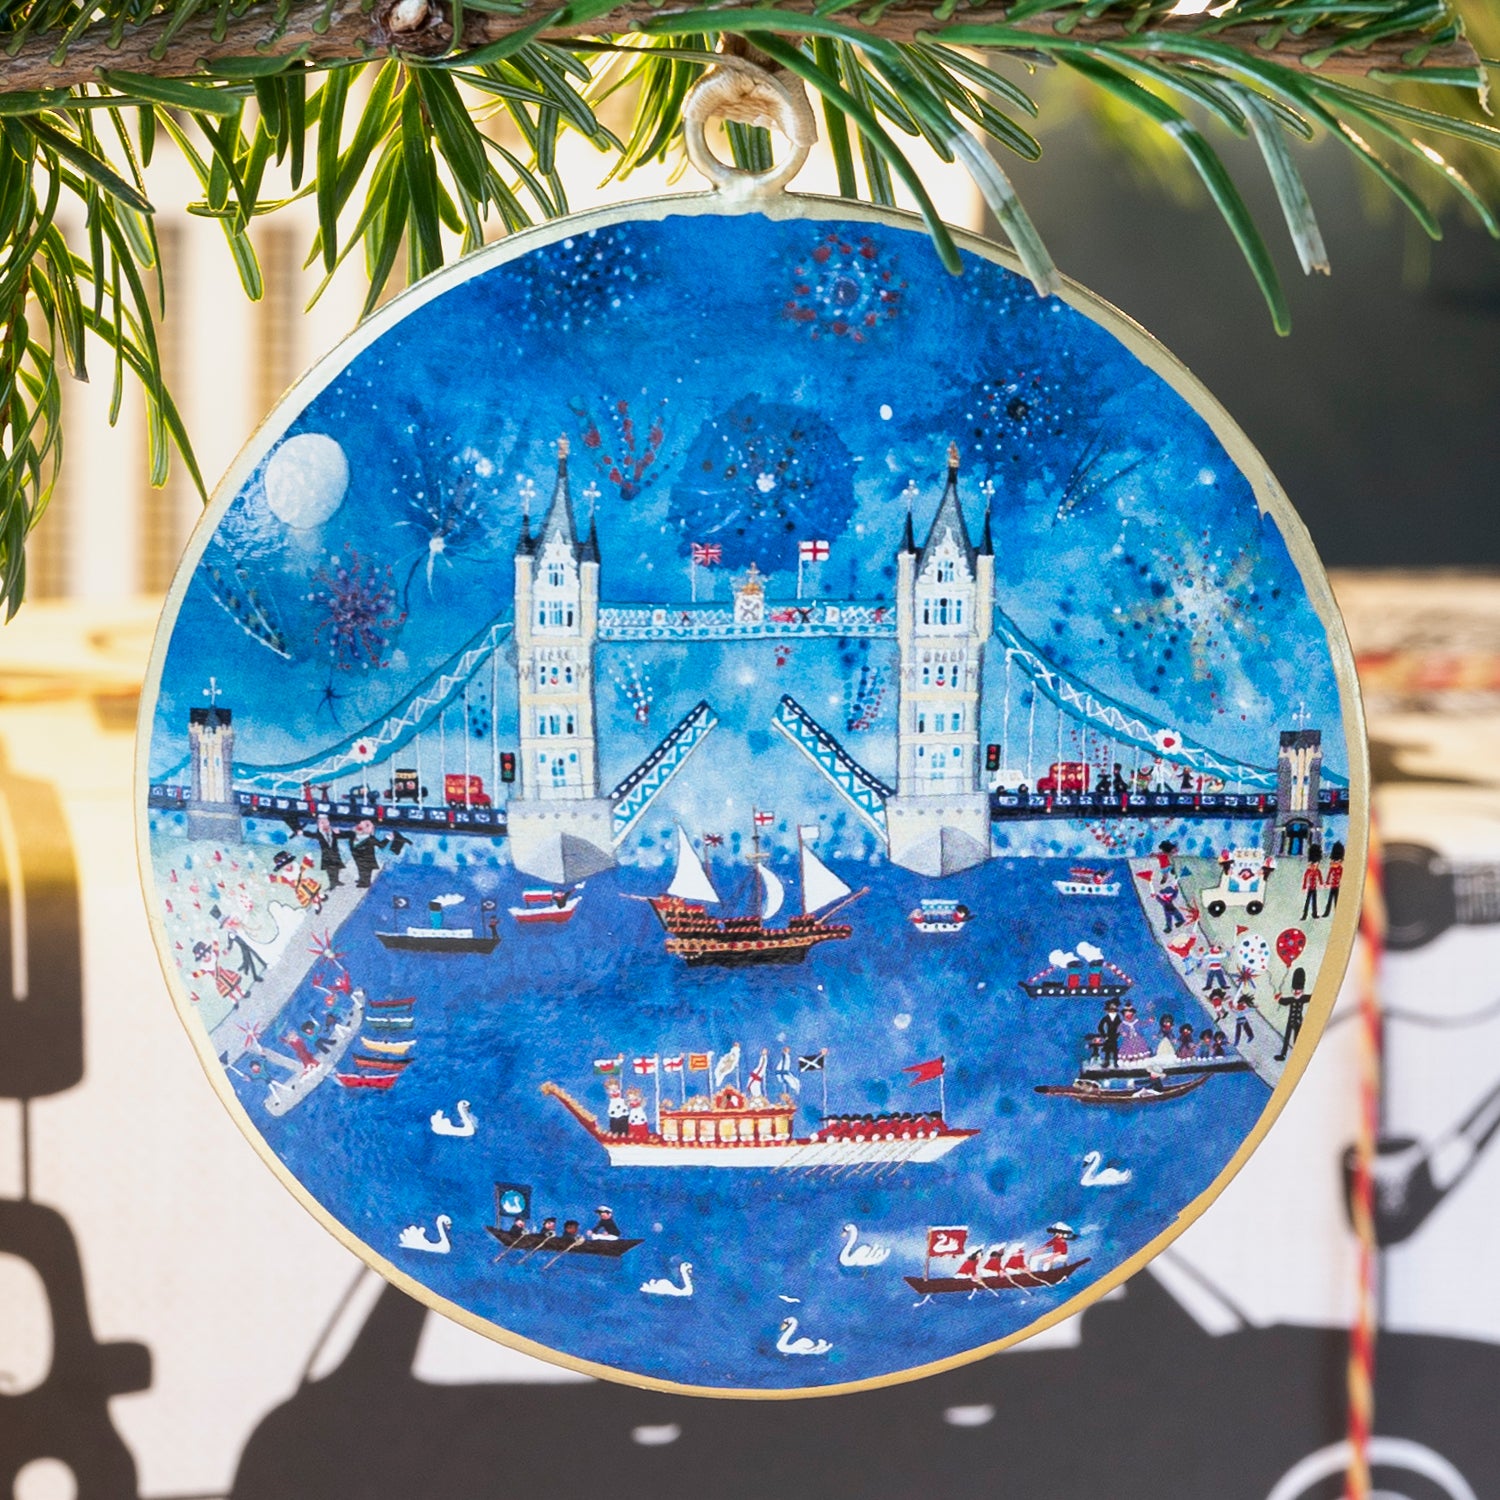 Metal Tower Bridge decoration by Lucy Loveheart hanging from Christmas tree